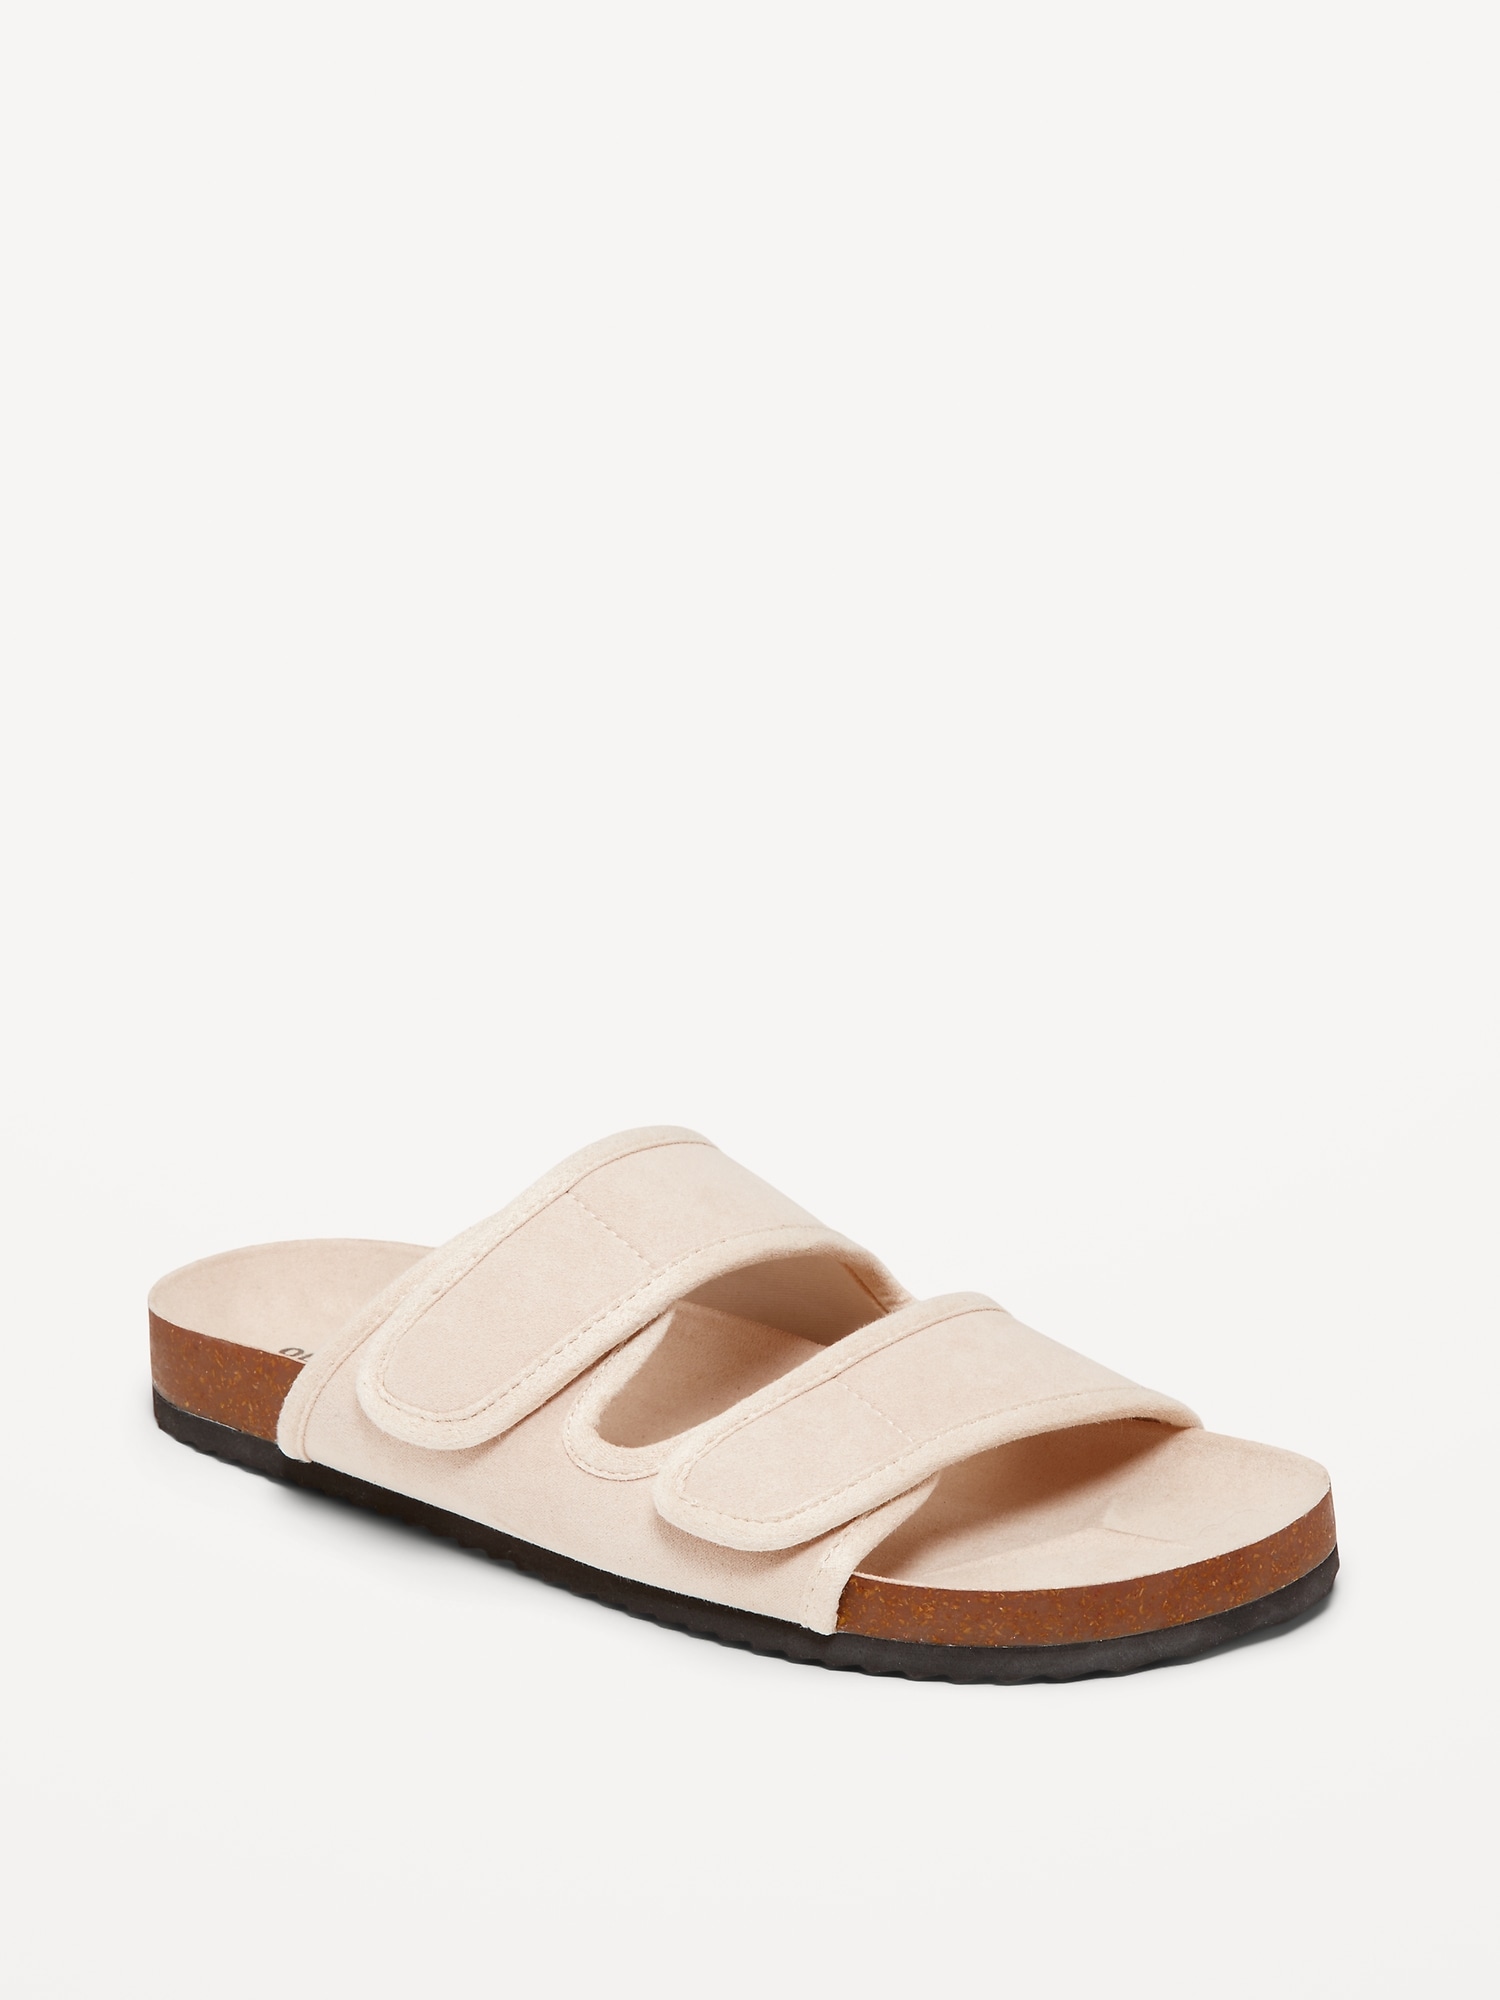 Double-Strap Faux-Suede Sandals | Old Navy